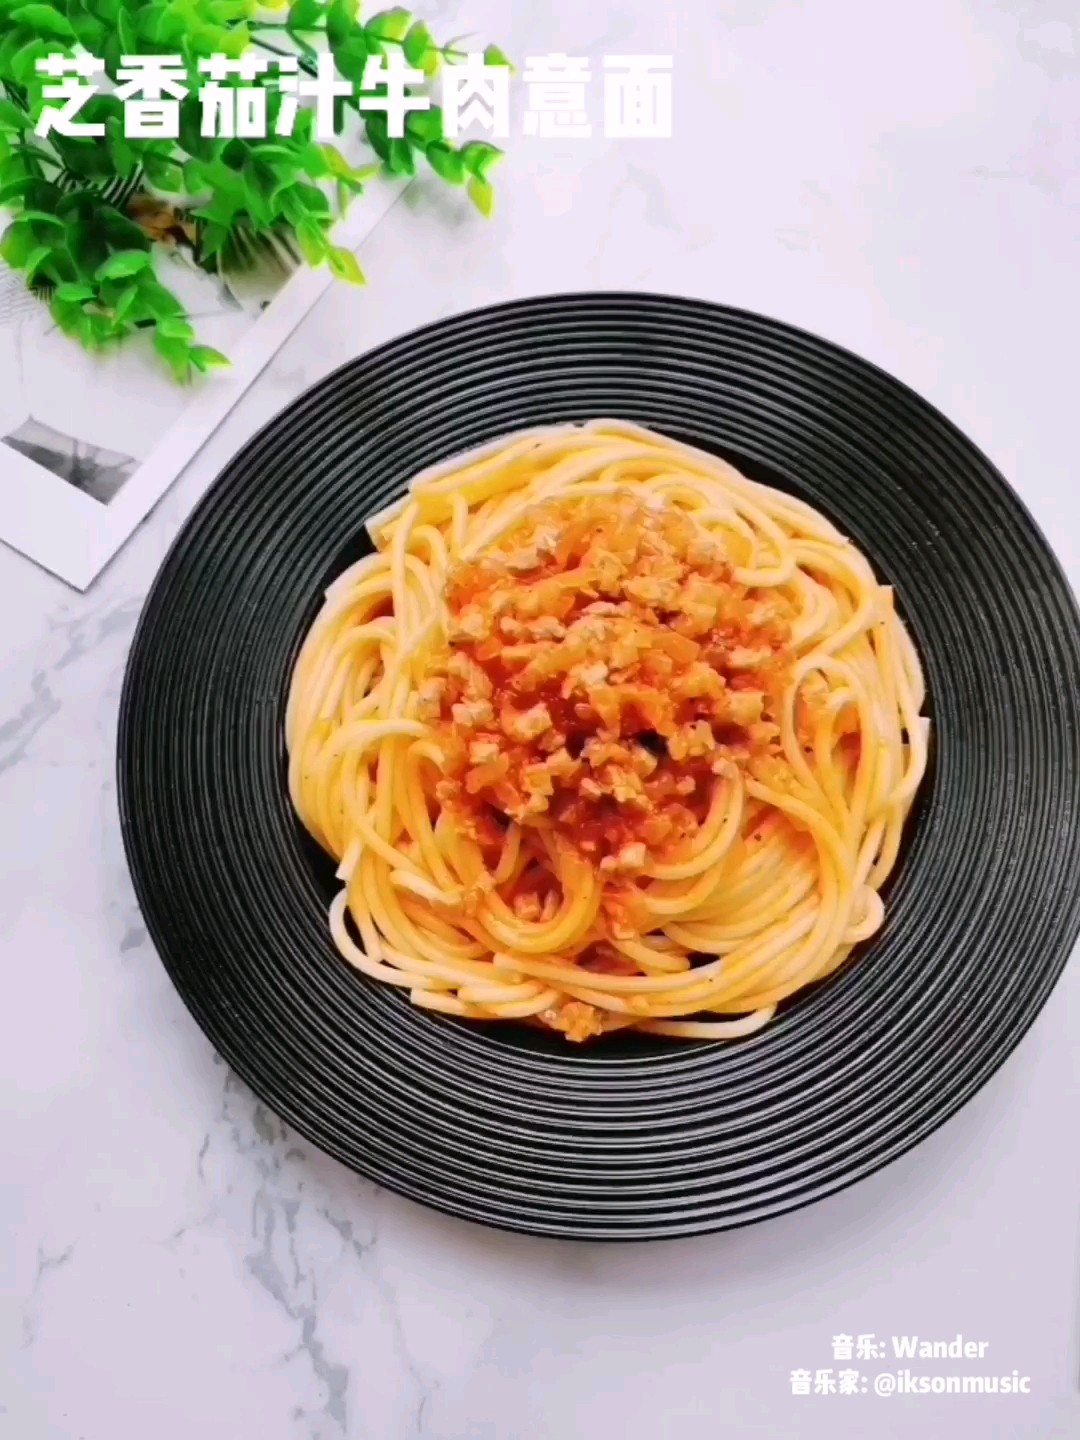 Beef Pasta with Cheese Tomato Sauce recipe